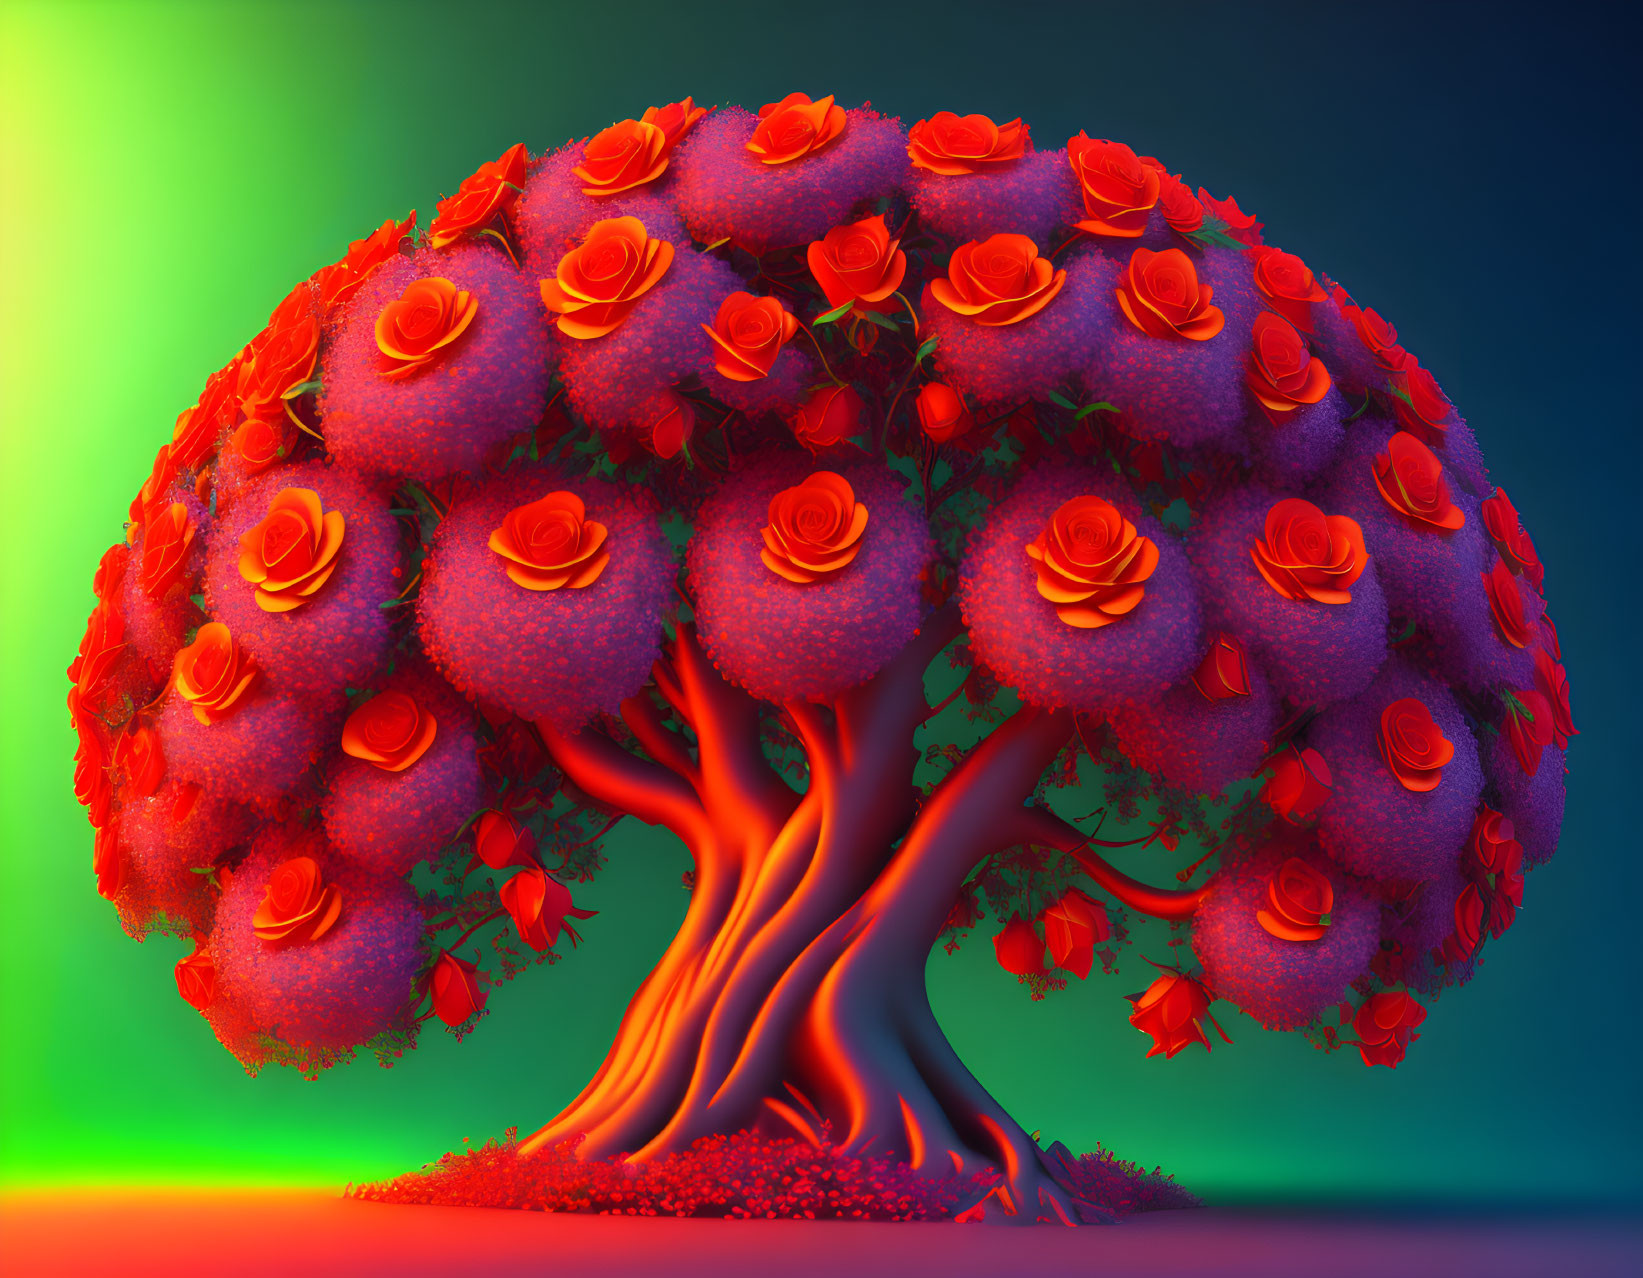 Fantastical tree with thick trunk and red roses on blue-green gradient.